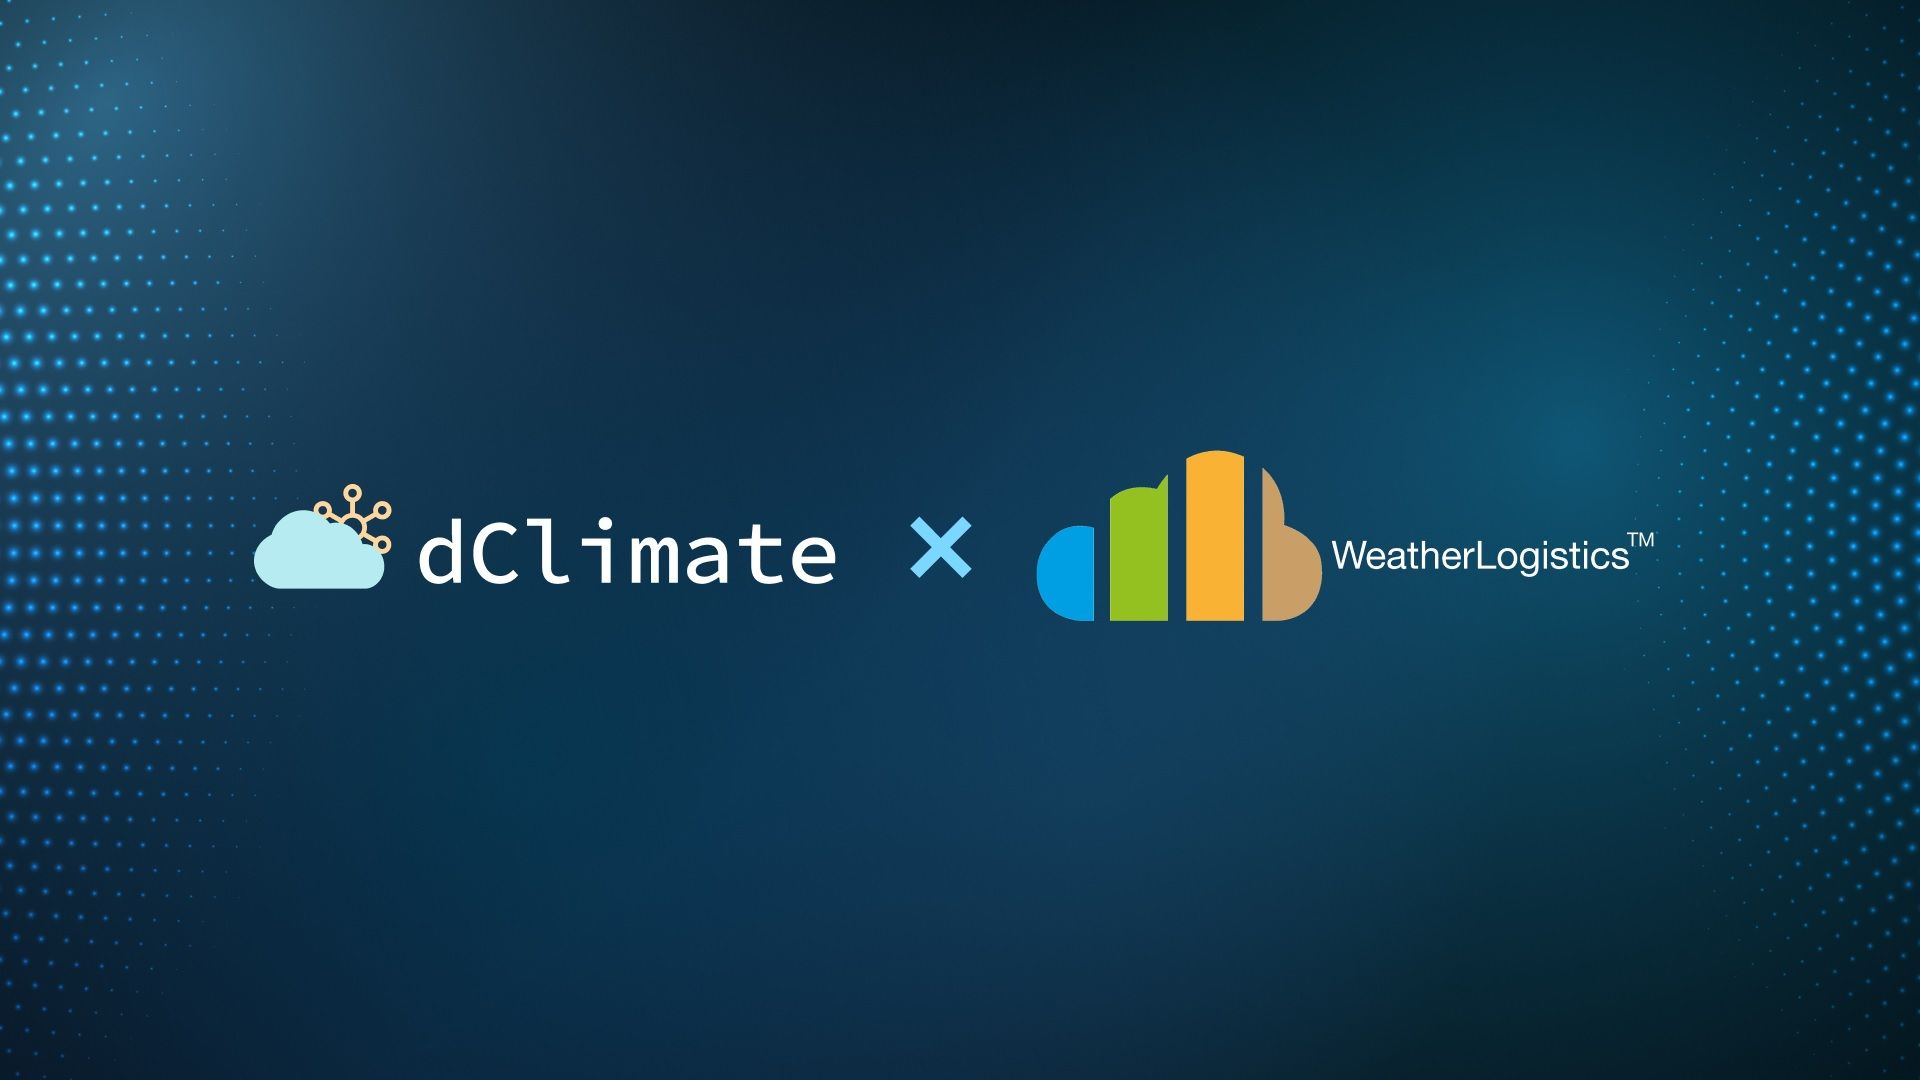 dClimate Partners with WeatherLogistics to Bring Access to its Re-Climate API to Community Builders and Users